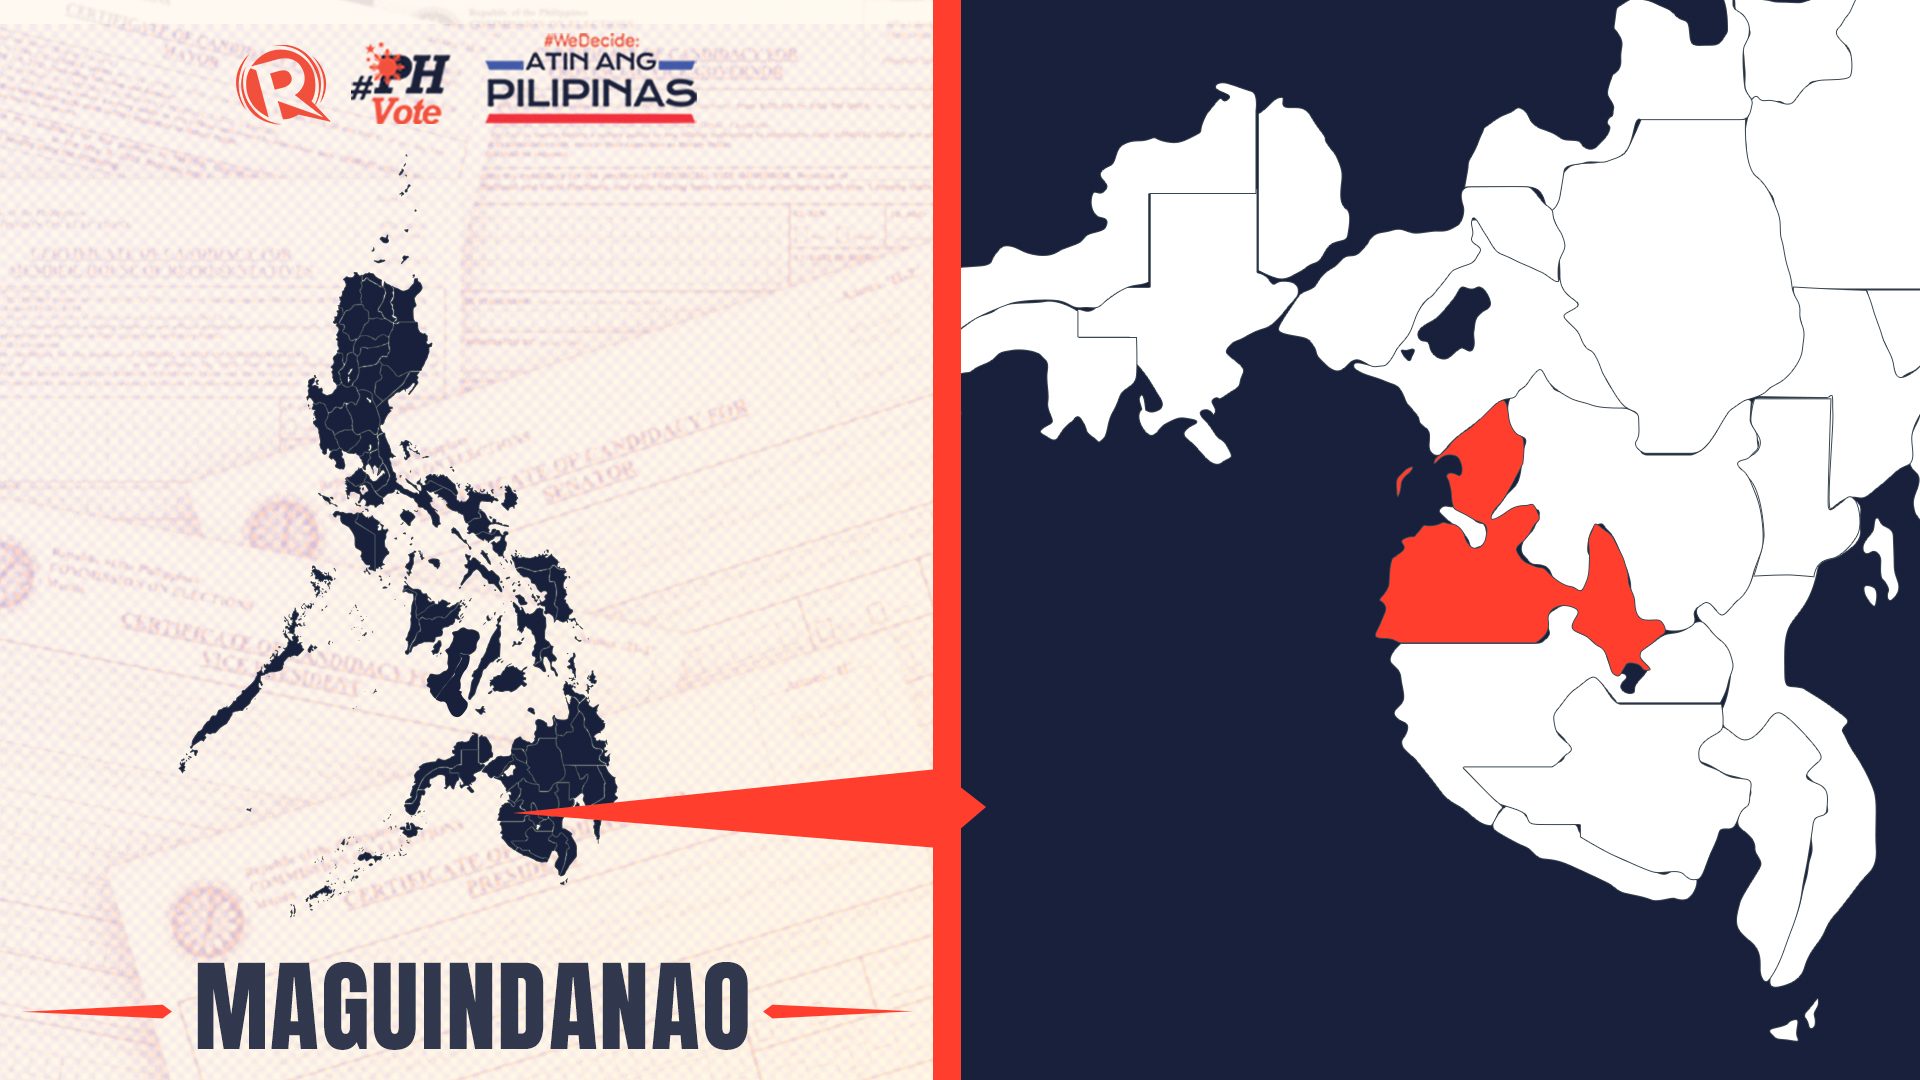 LIST: Who is running in Maguindanao in the 2022 Philippine elections?